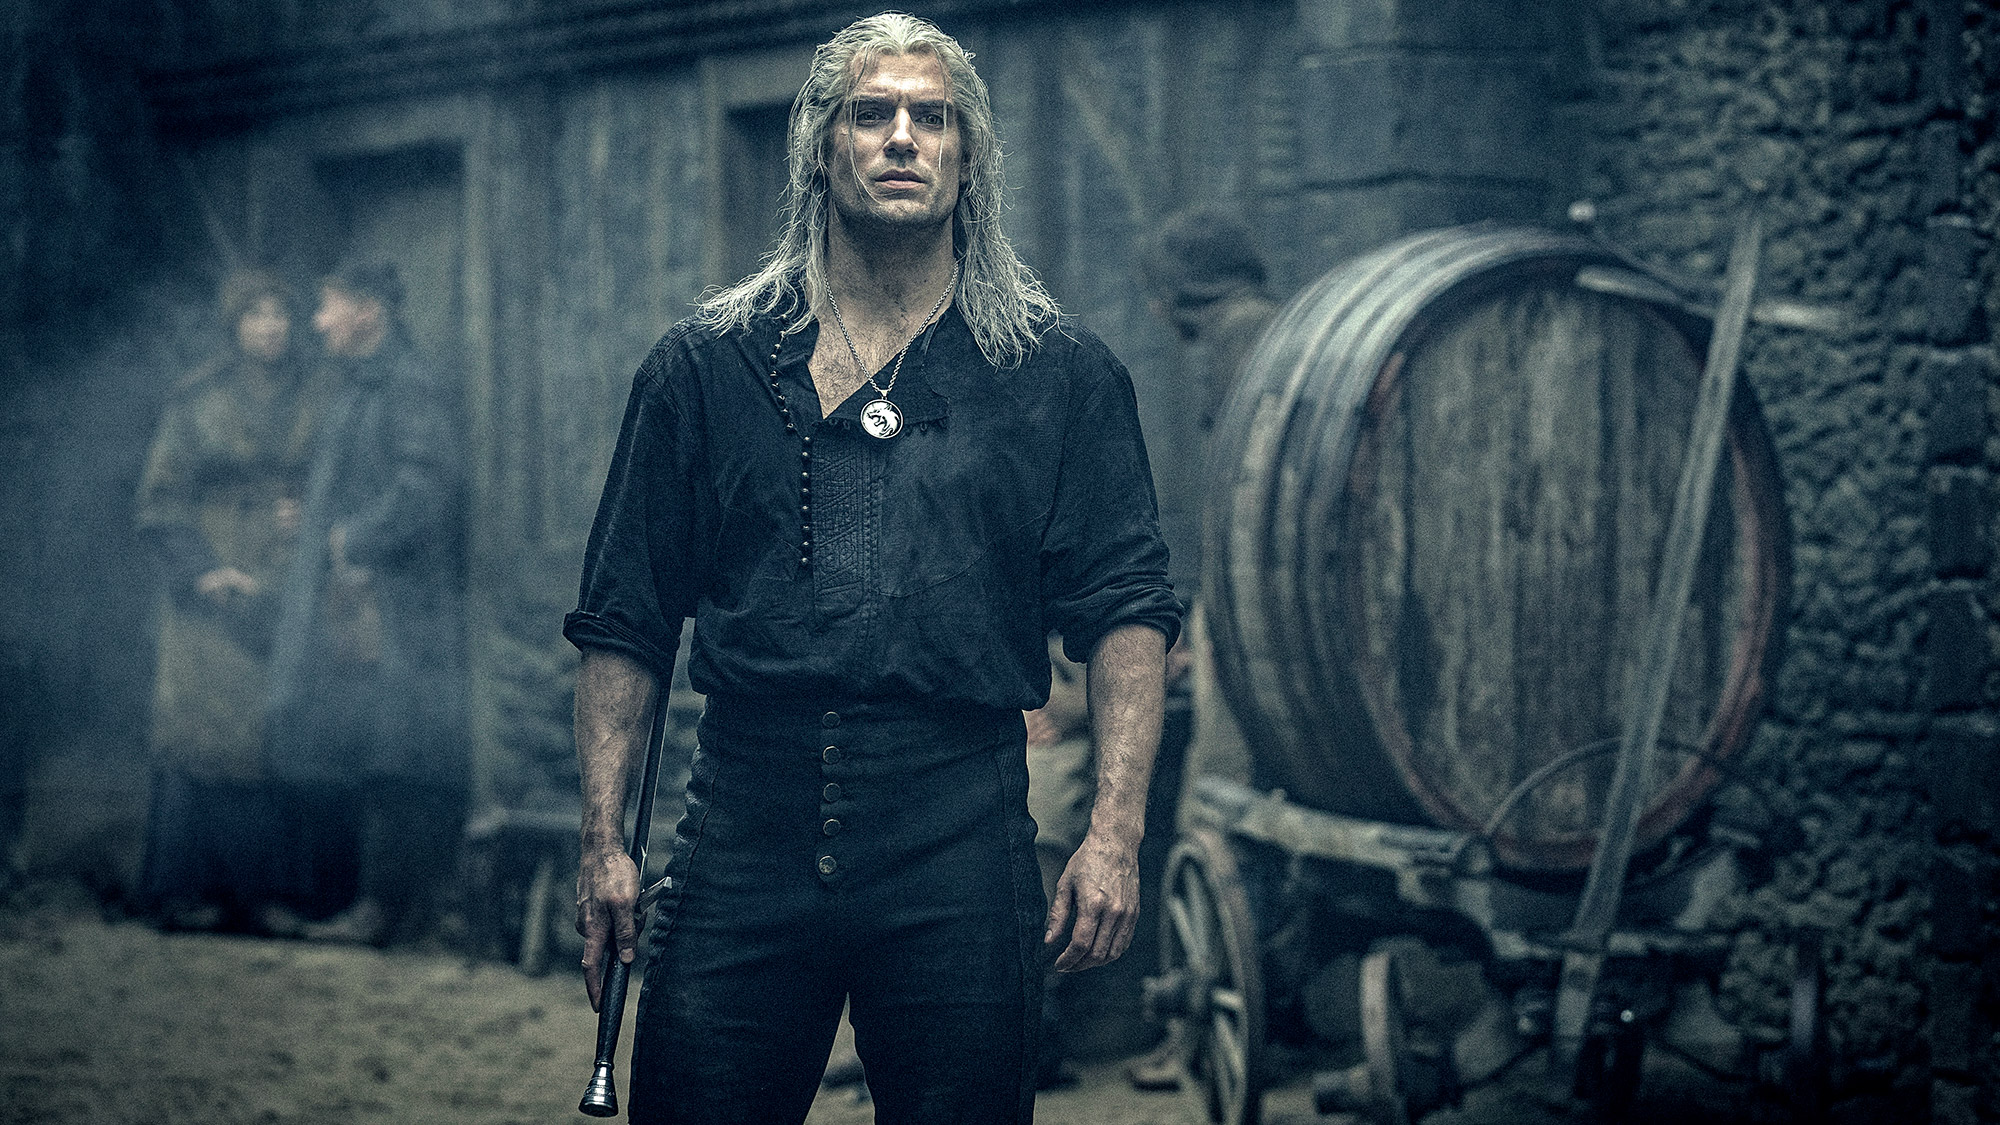 The Witcher season 2 release date, filming wrapped, cast and latest news |  Tom's Guide